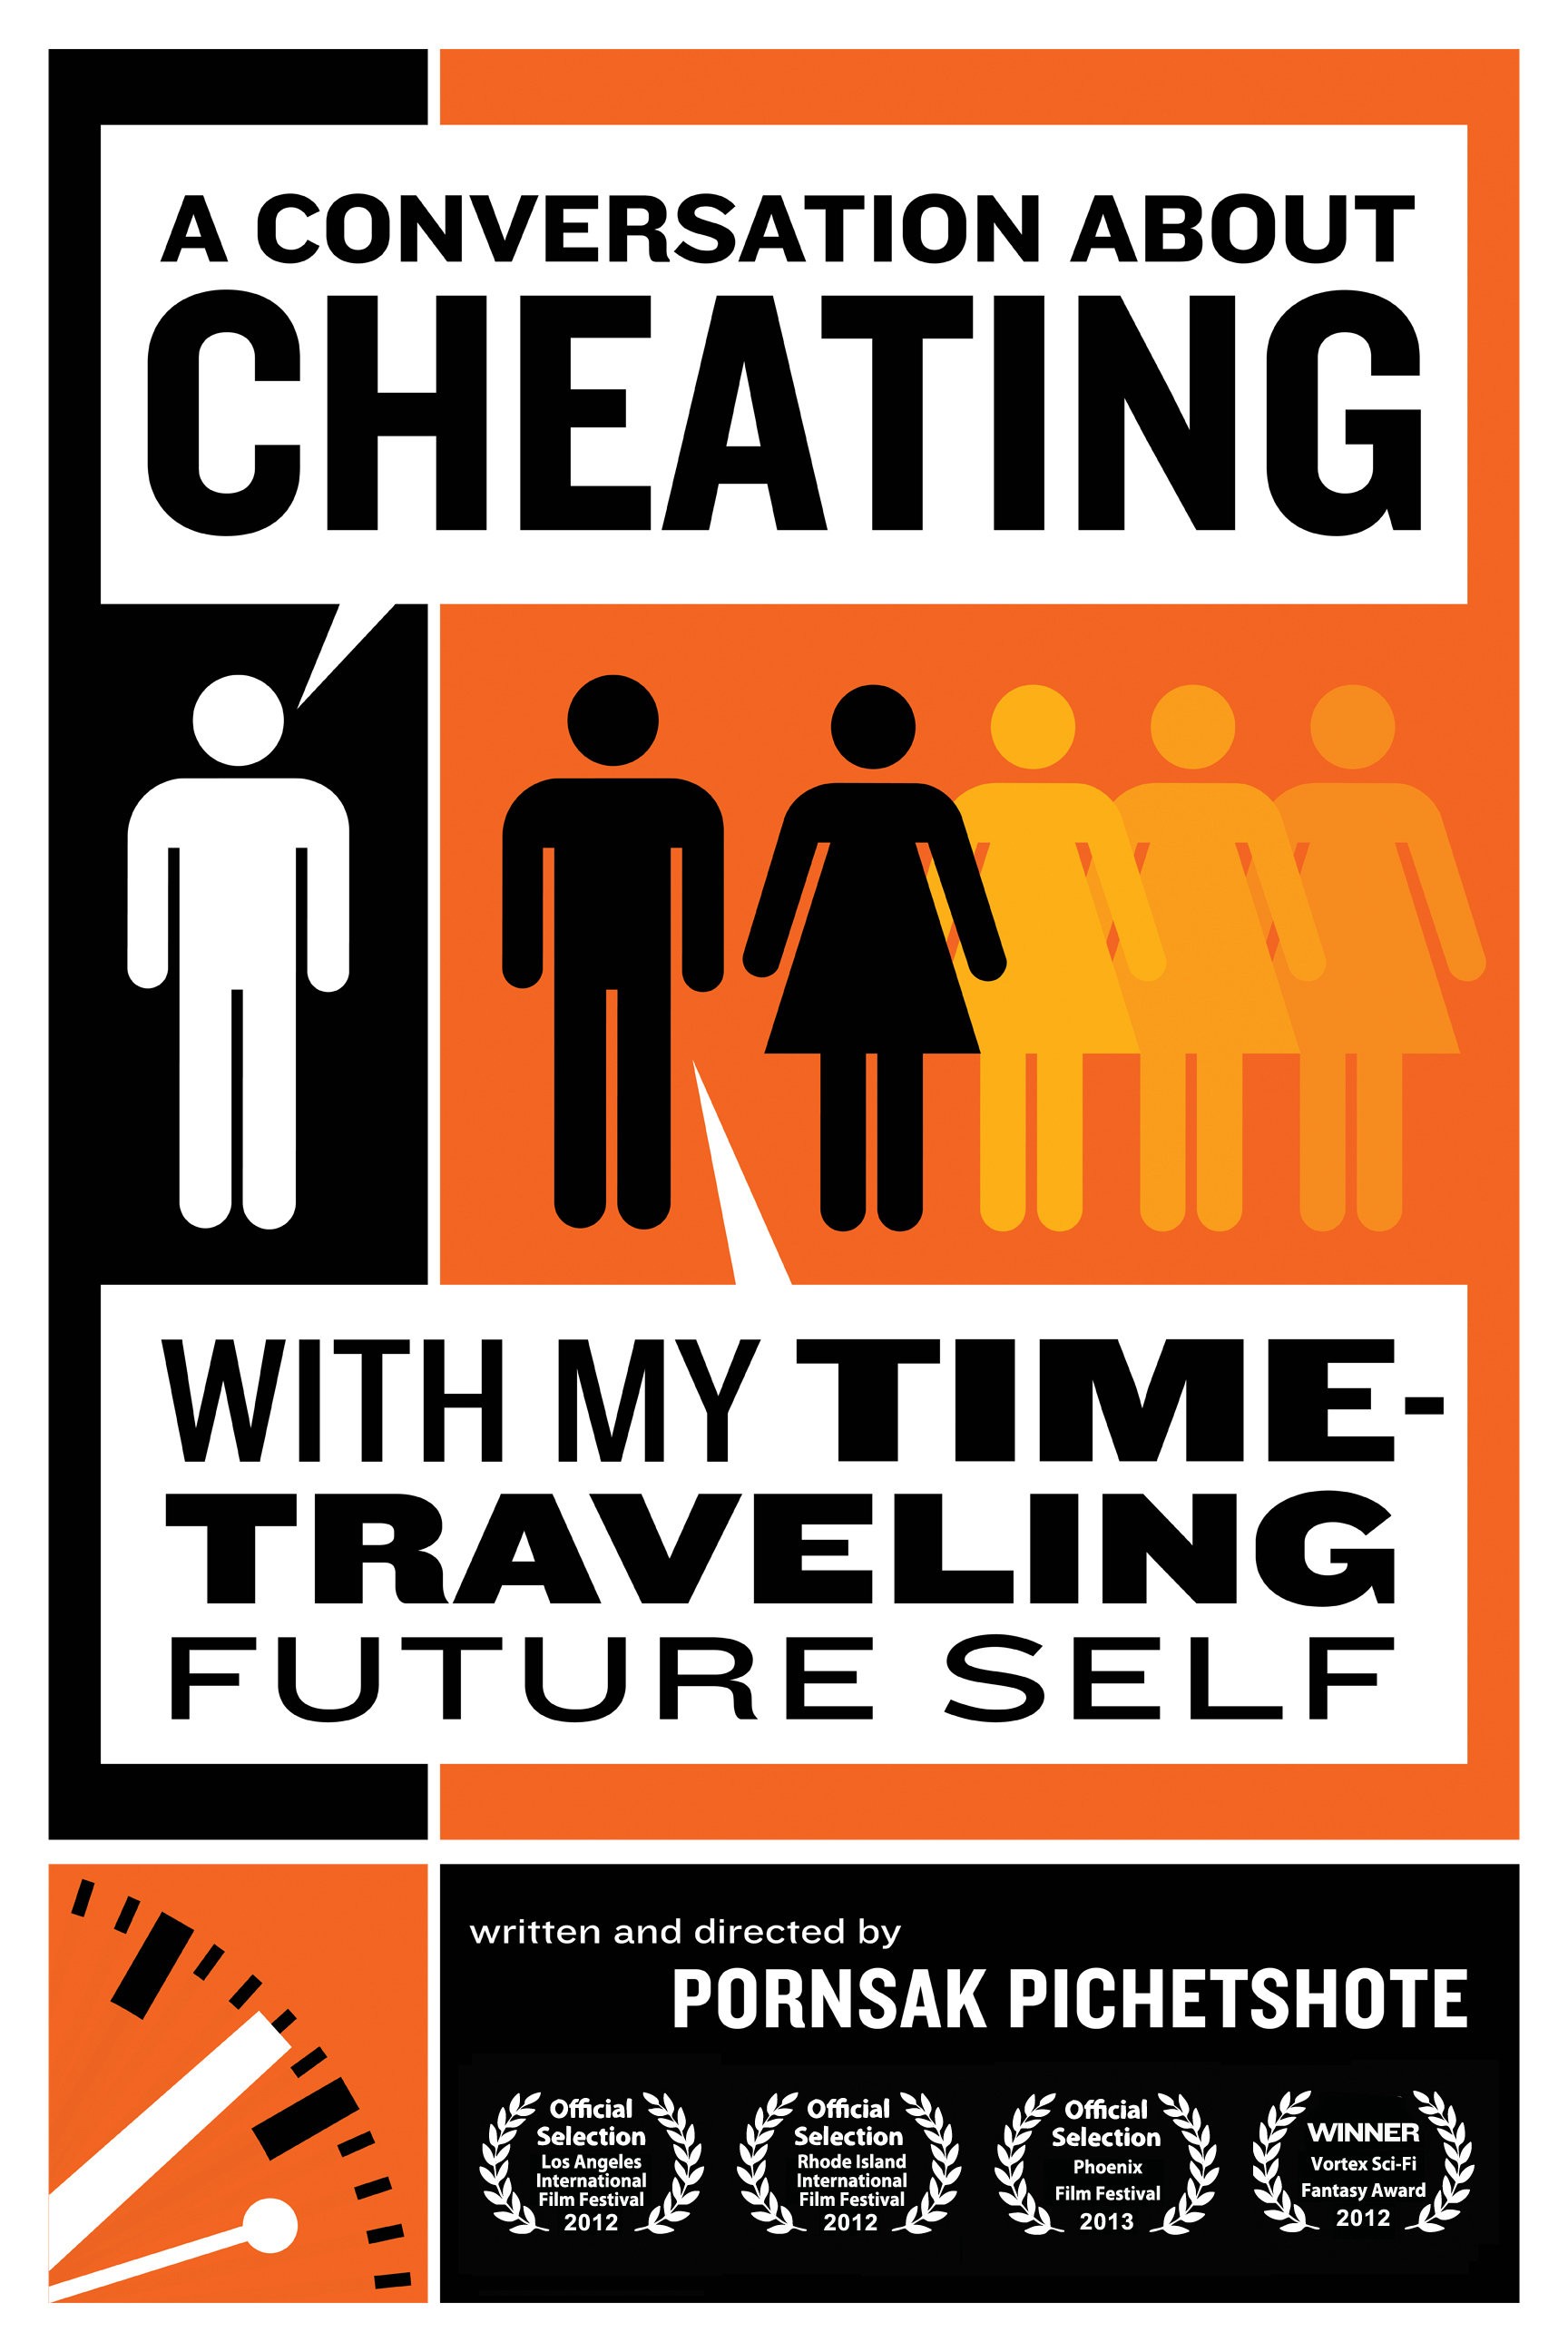 Mega Sized Movie Poster Image for A Conversation About Cheating with My Time Travelling Future Self